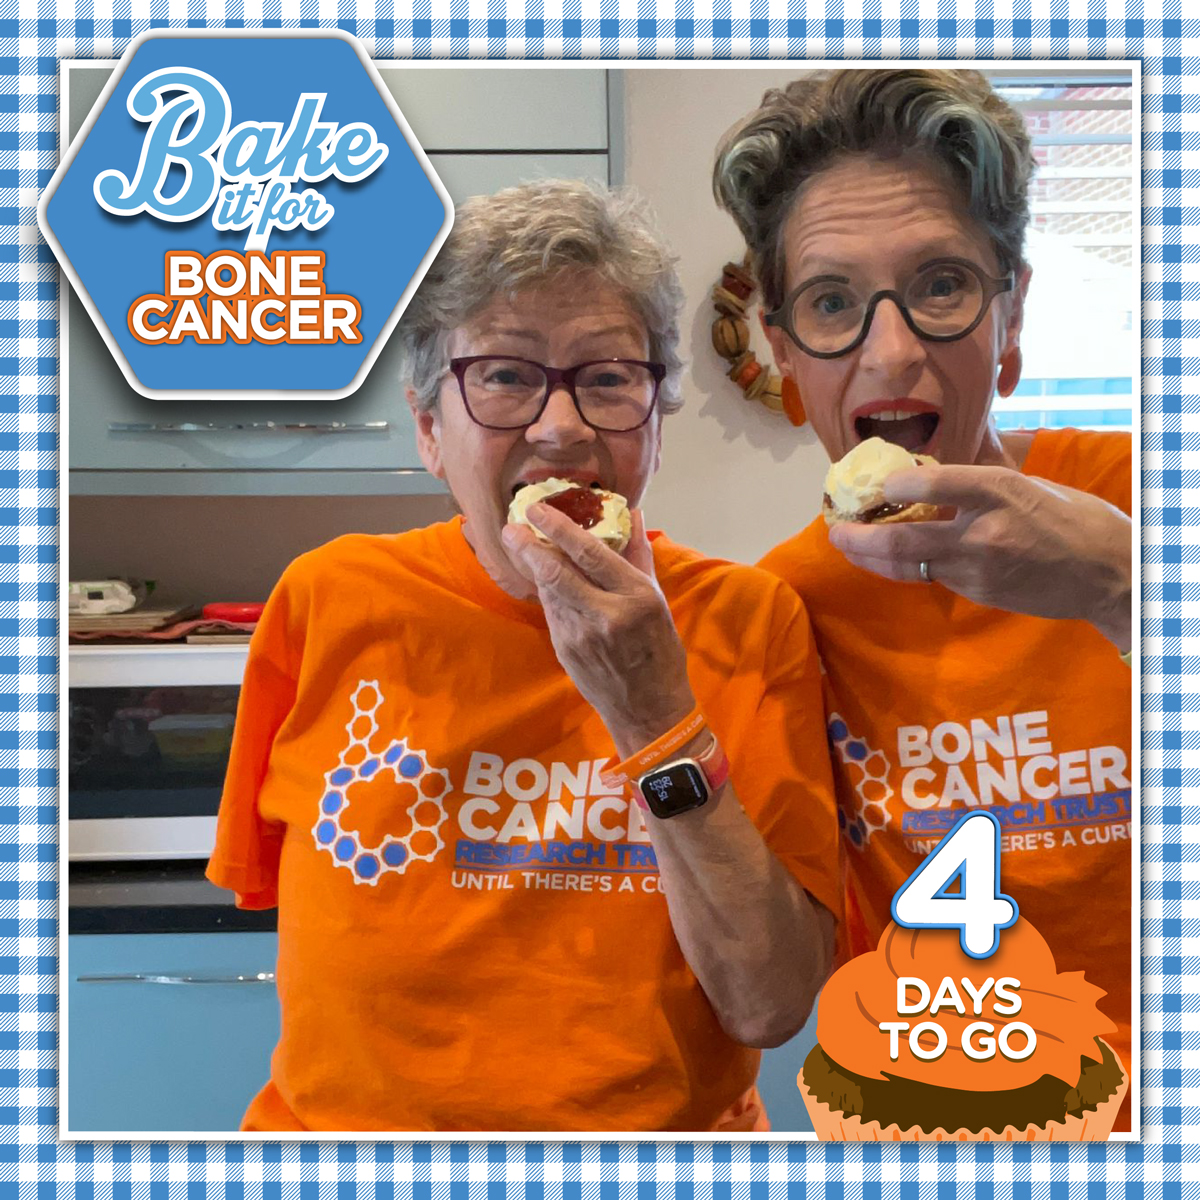 There's only 4 days to go until we Bake for a Breakthrough to give hope to all primary bone cancer patients like Isobel 🧡 Self-raise vital funds by joining us on the 14th October for Bake it for Bone Cancer Day! 🍰 #BIFBC #BeMoreIsobel